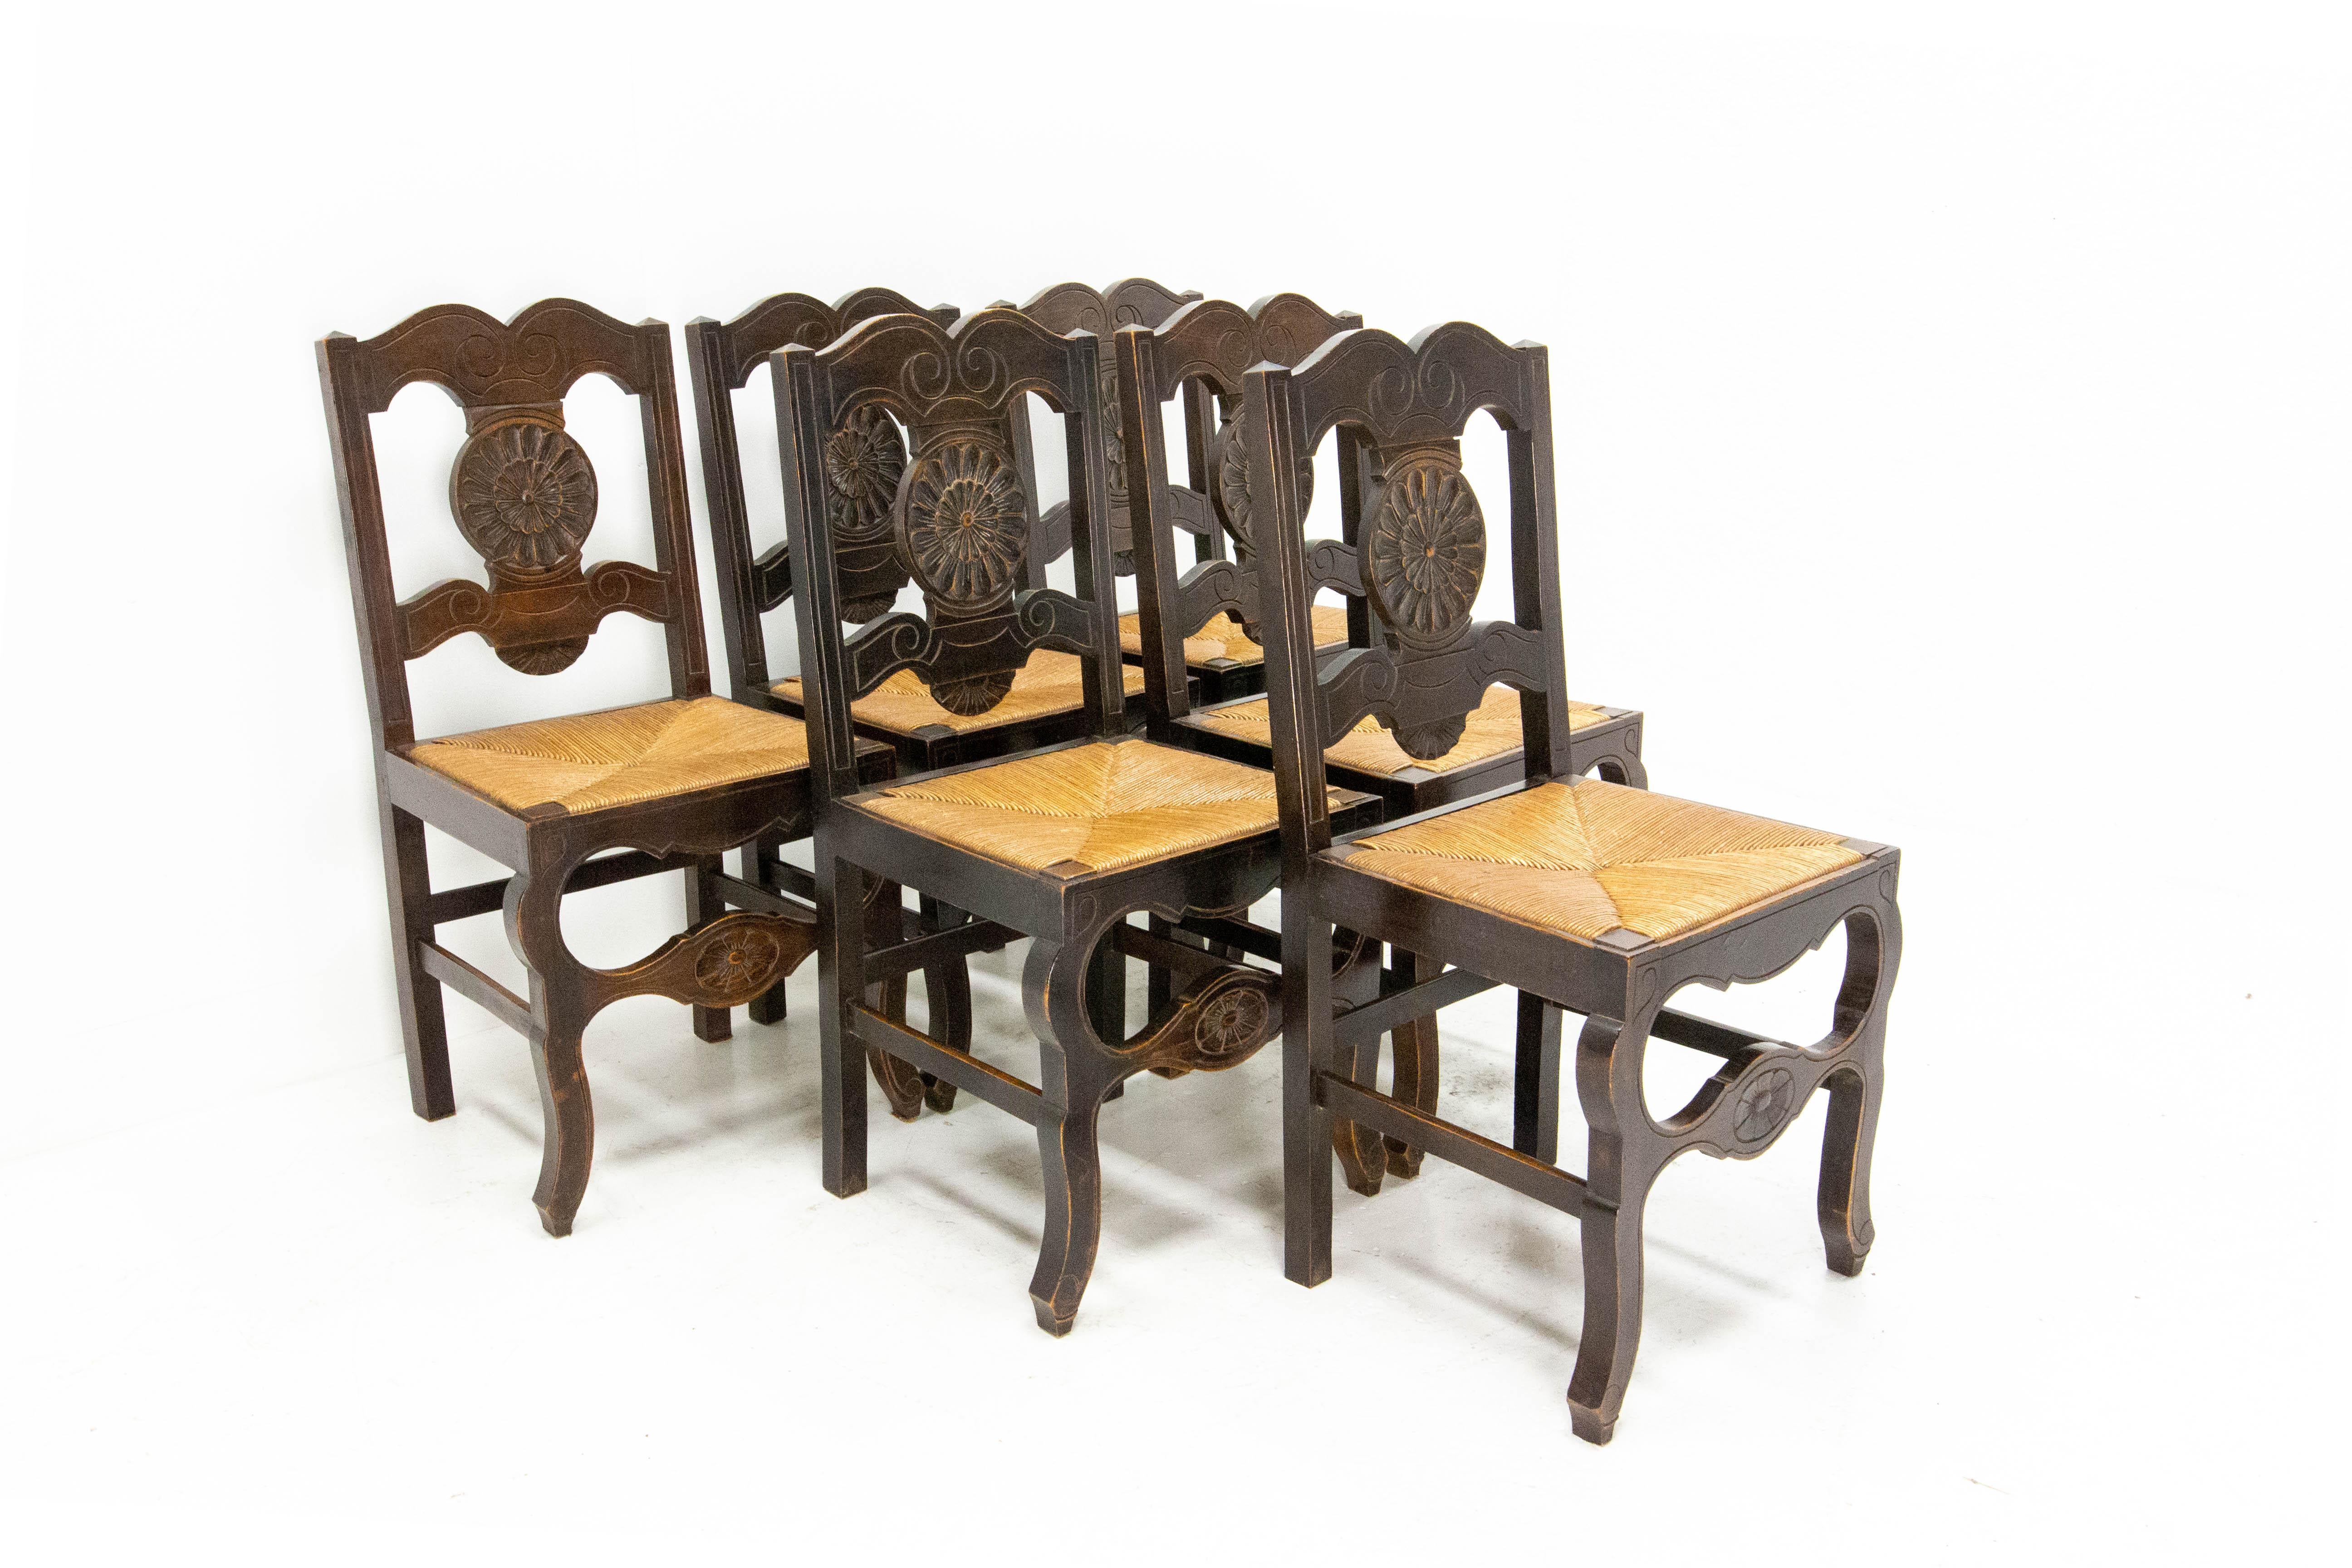 Six dining chairs with rush seats
Poplar
In good condition, sound and solid.

Shipping:
3 packs:
Measures: L 46 P 59 H 80 12 kg each pack.